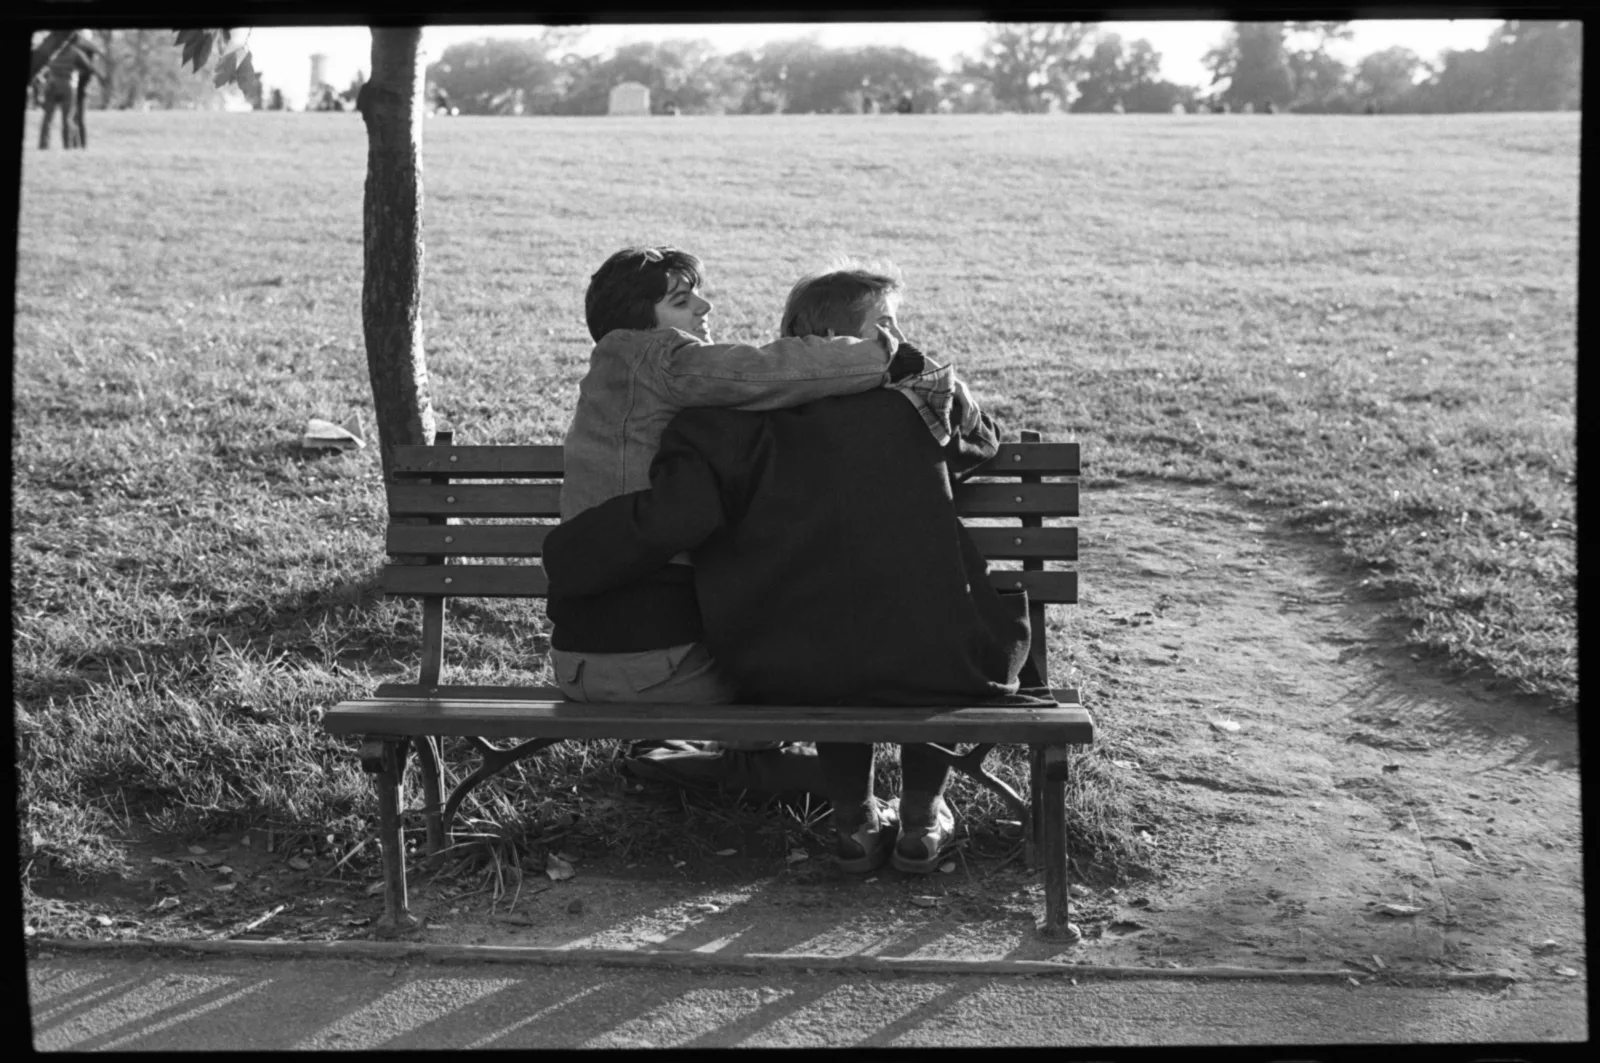 Two people sit and embrace on a park bench.